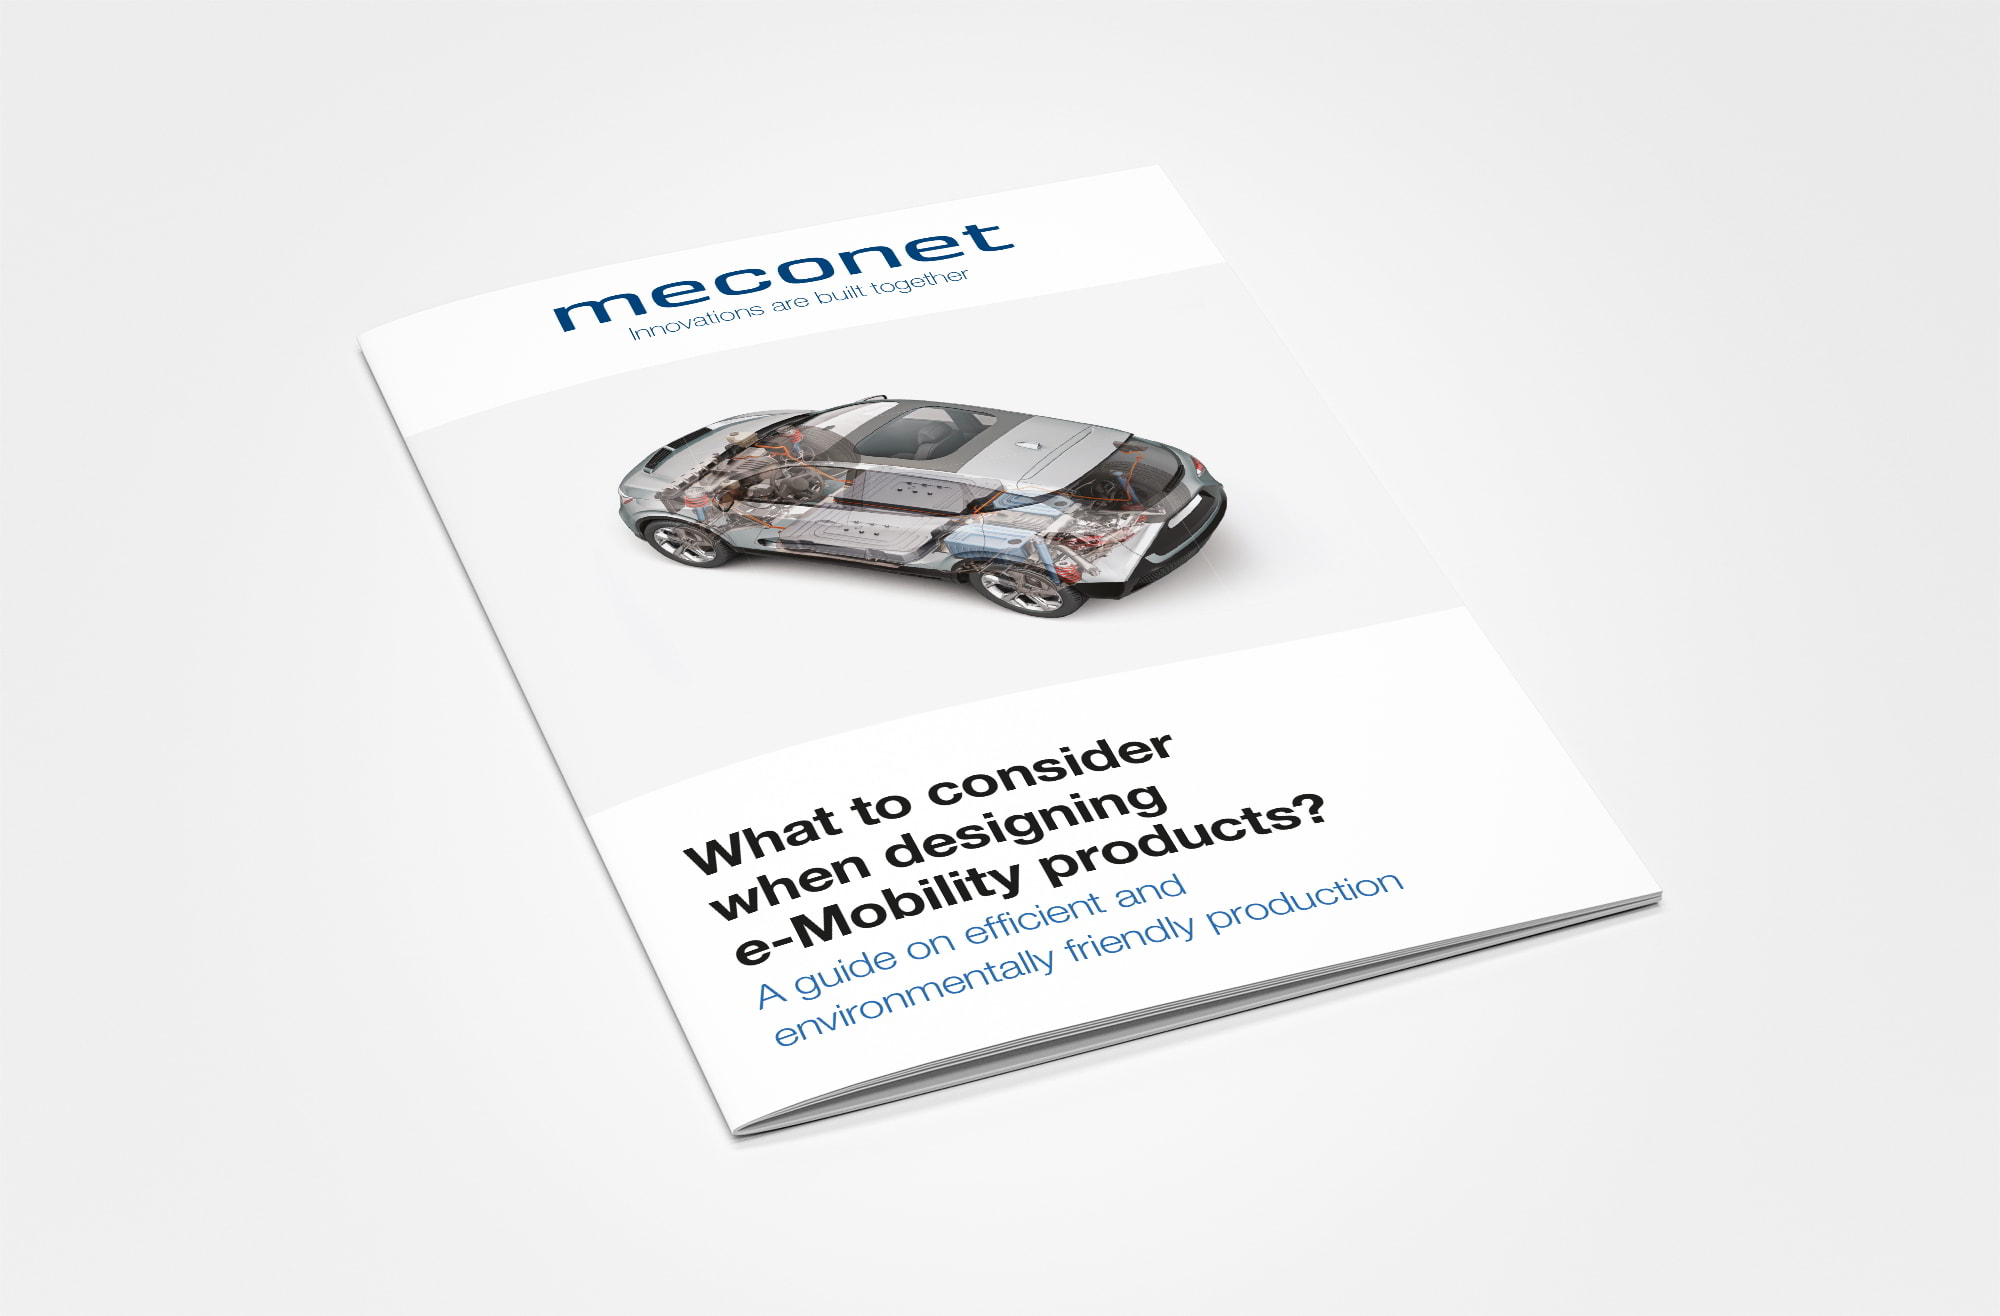 Meconet design tips for e-mobility products